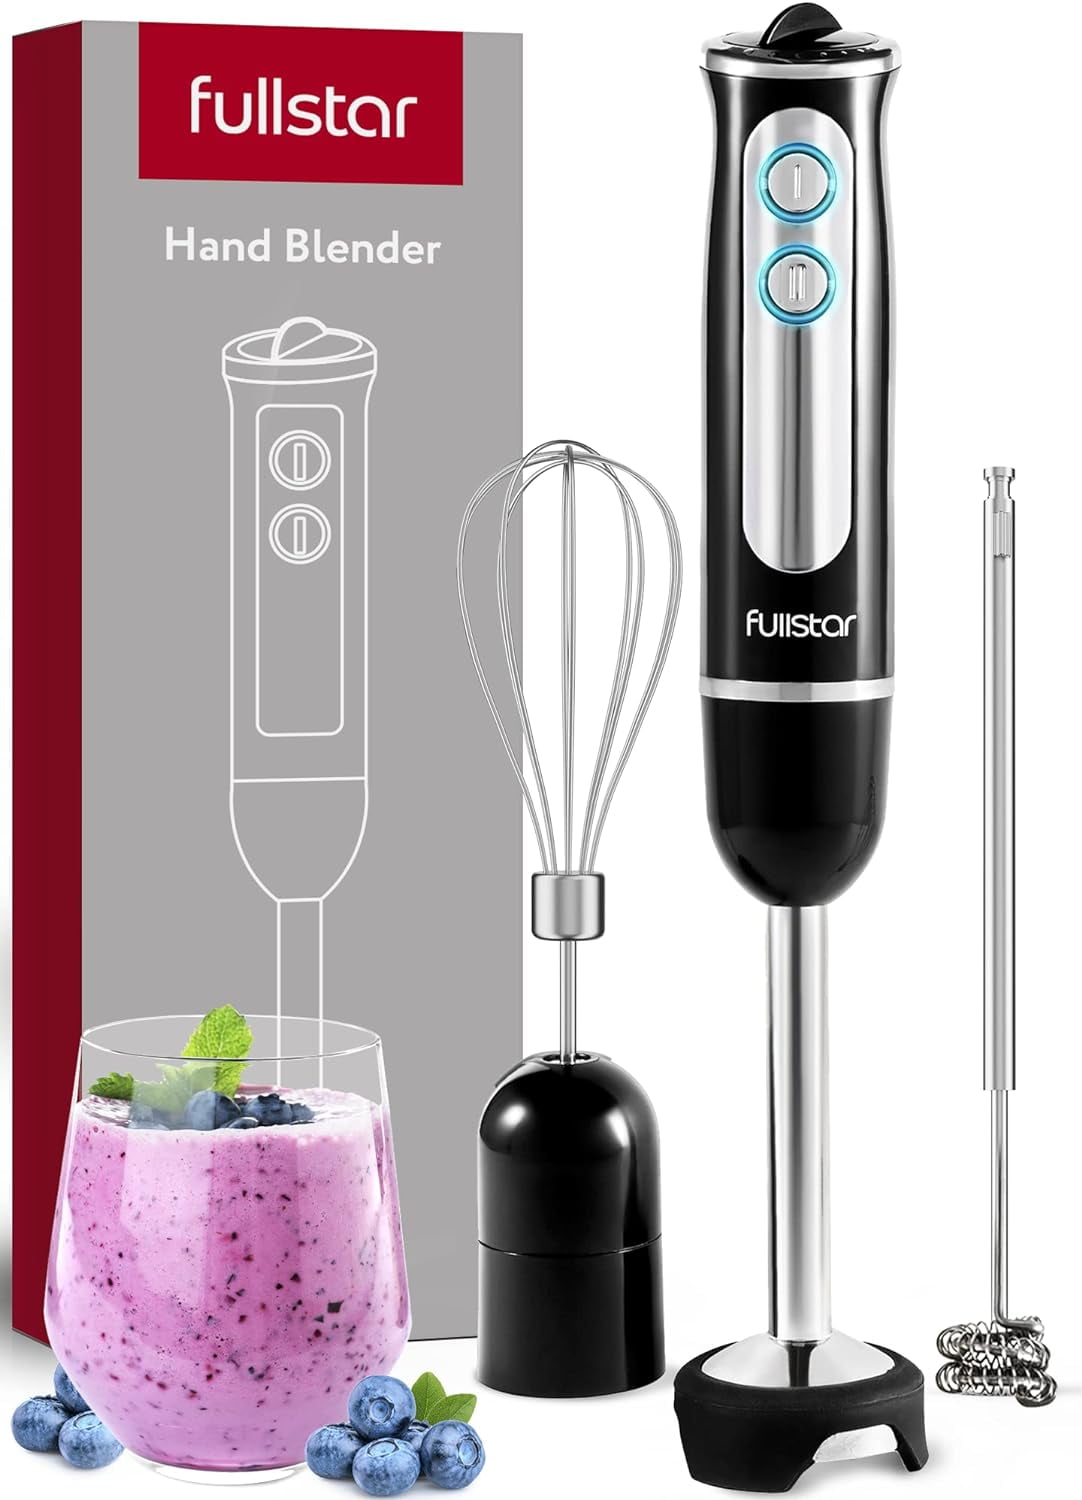  New House Kitchen Immersion Hand Blender 2 Speed Stick Mixer  with Stainless Steel Shaft & Blade 300 Watts Easily Food, Mixes Sauces,  Purees Soups, Smoothies, and Dips, Red : Everything Else